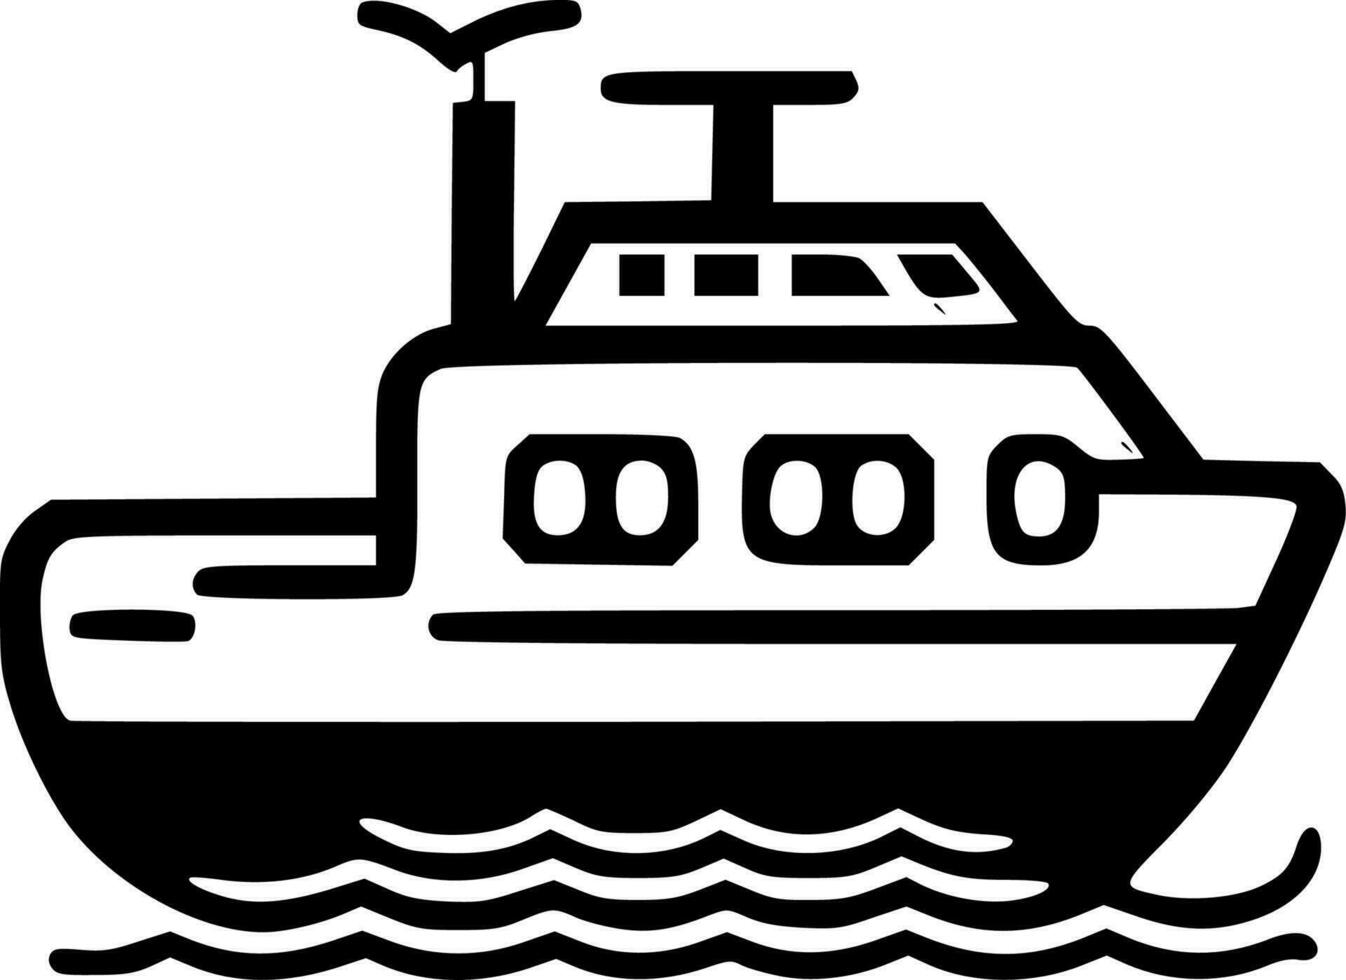 Boat - Black and White Isolated Icon - Vector illustration